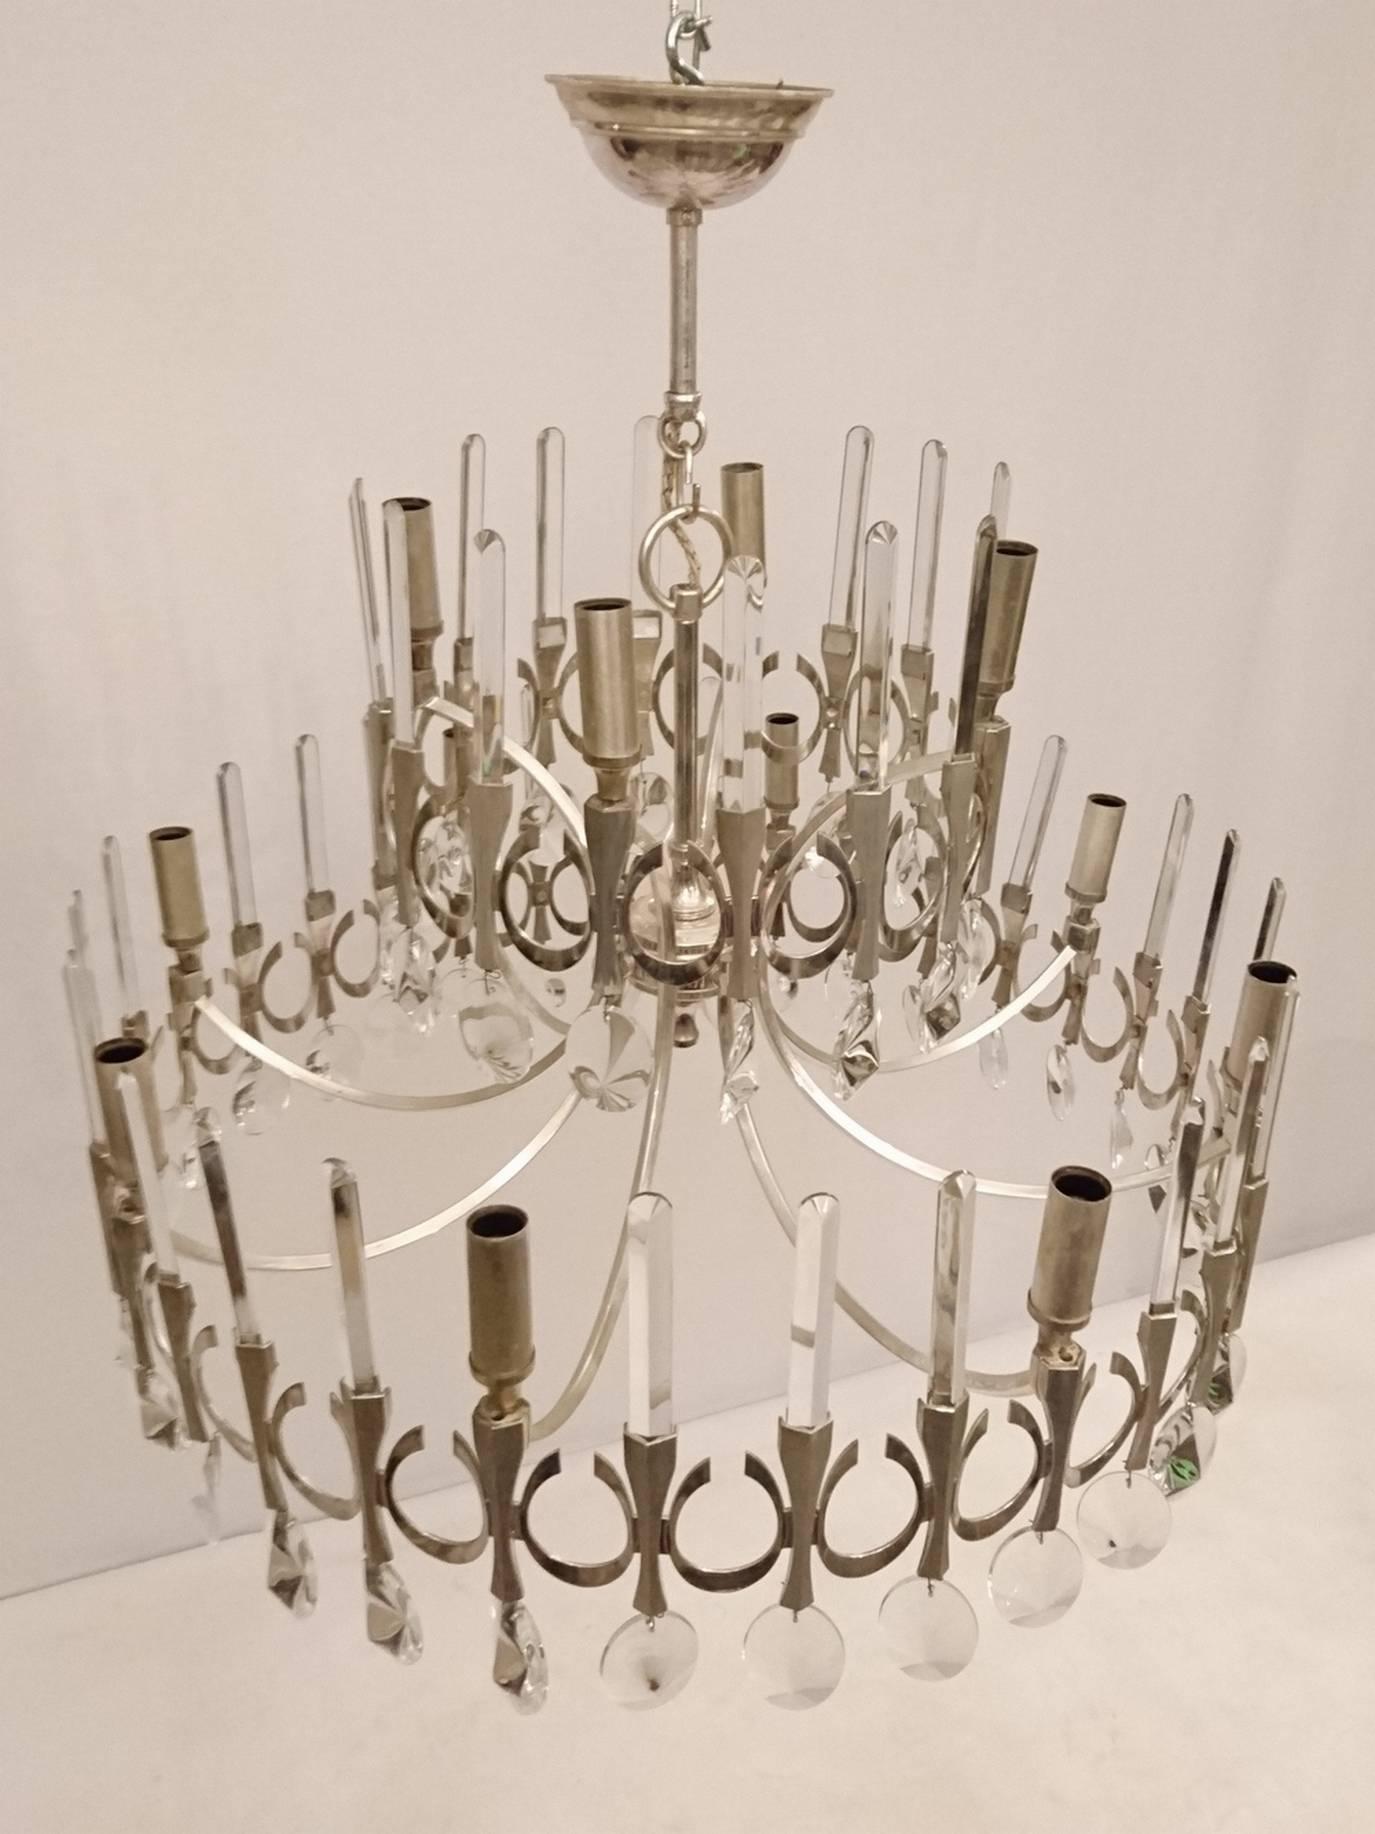 Large Classic chandelier design by Gaetano Sciolari with crystal prisms with a satin finish on the metal. It has a total of 12 lights, eight at the bottom and four on top. Carries 12 standard small screw standard light bulbs (E17) up to 40 watts